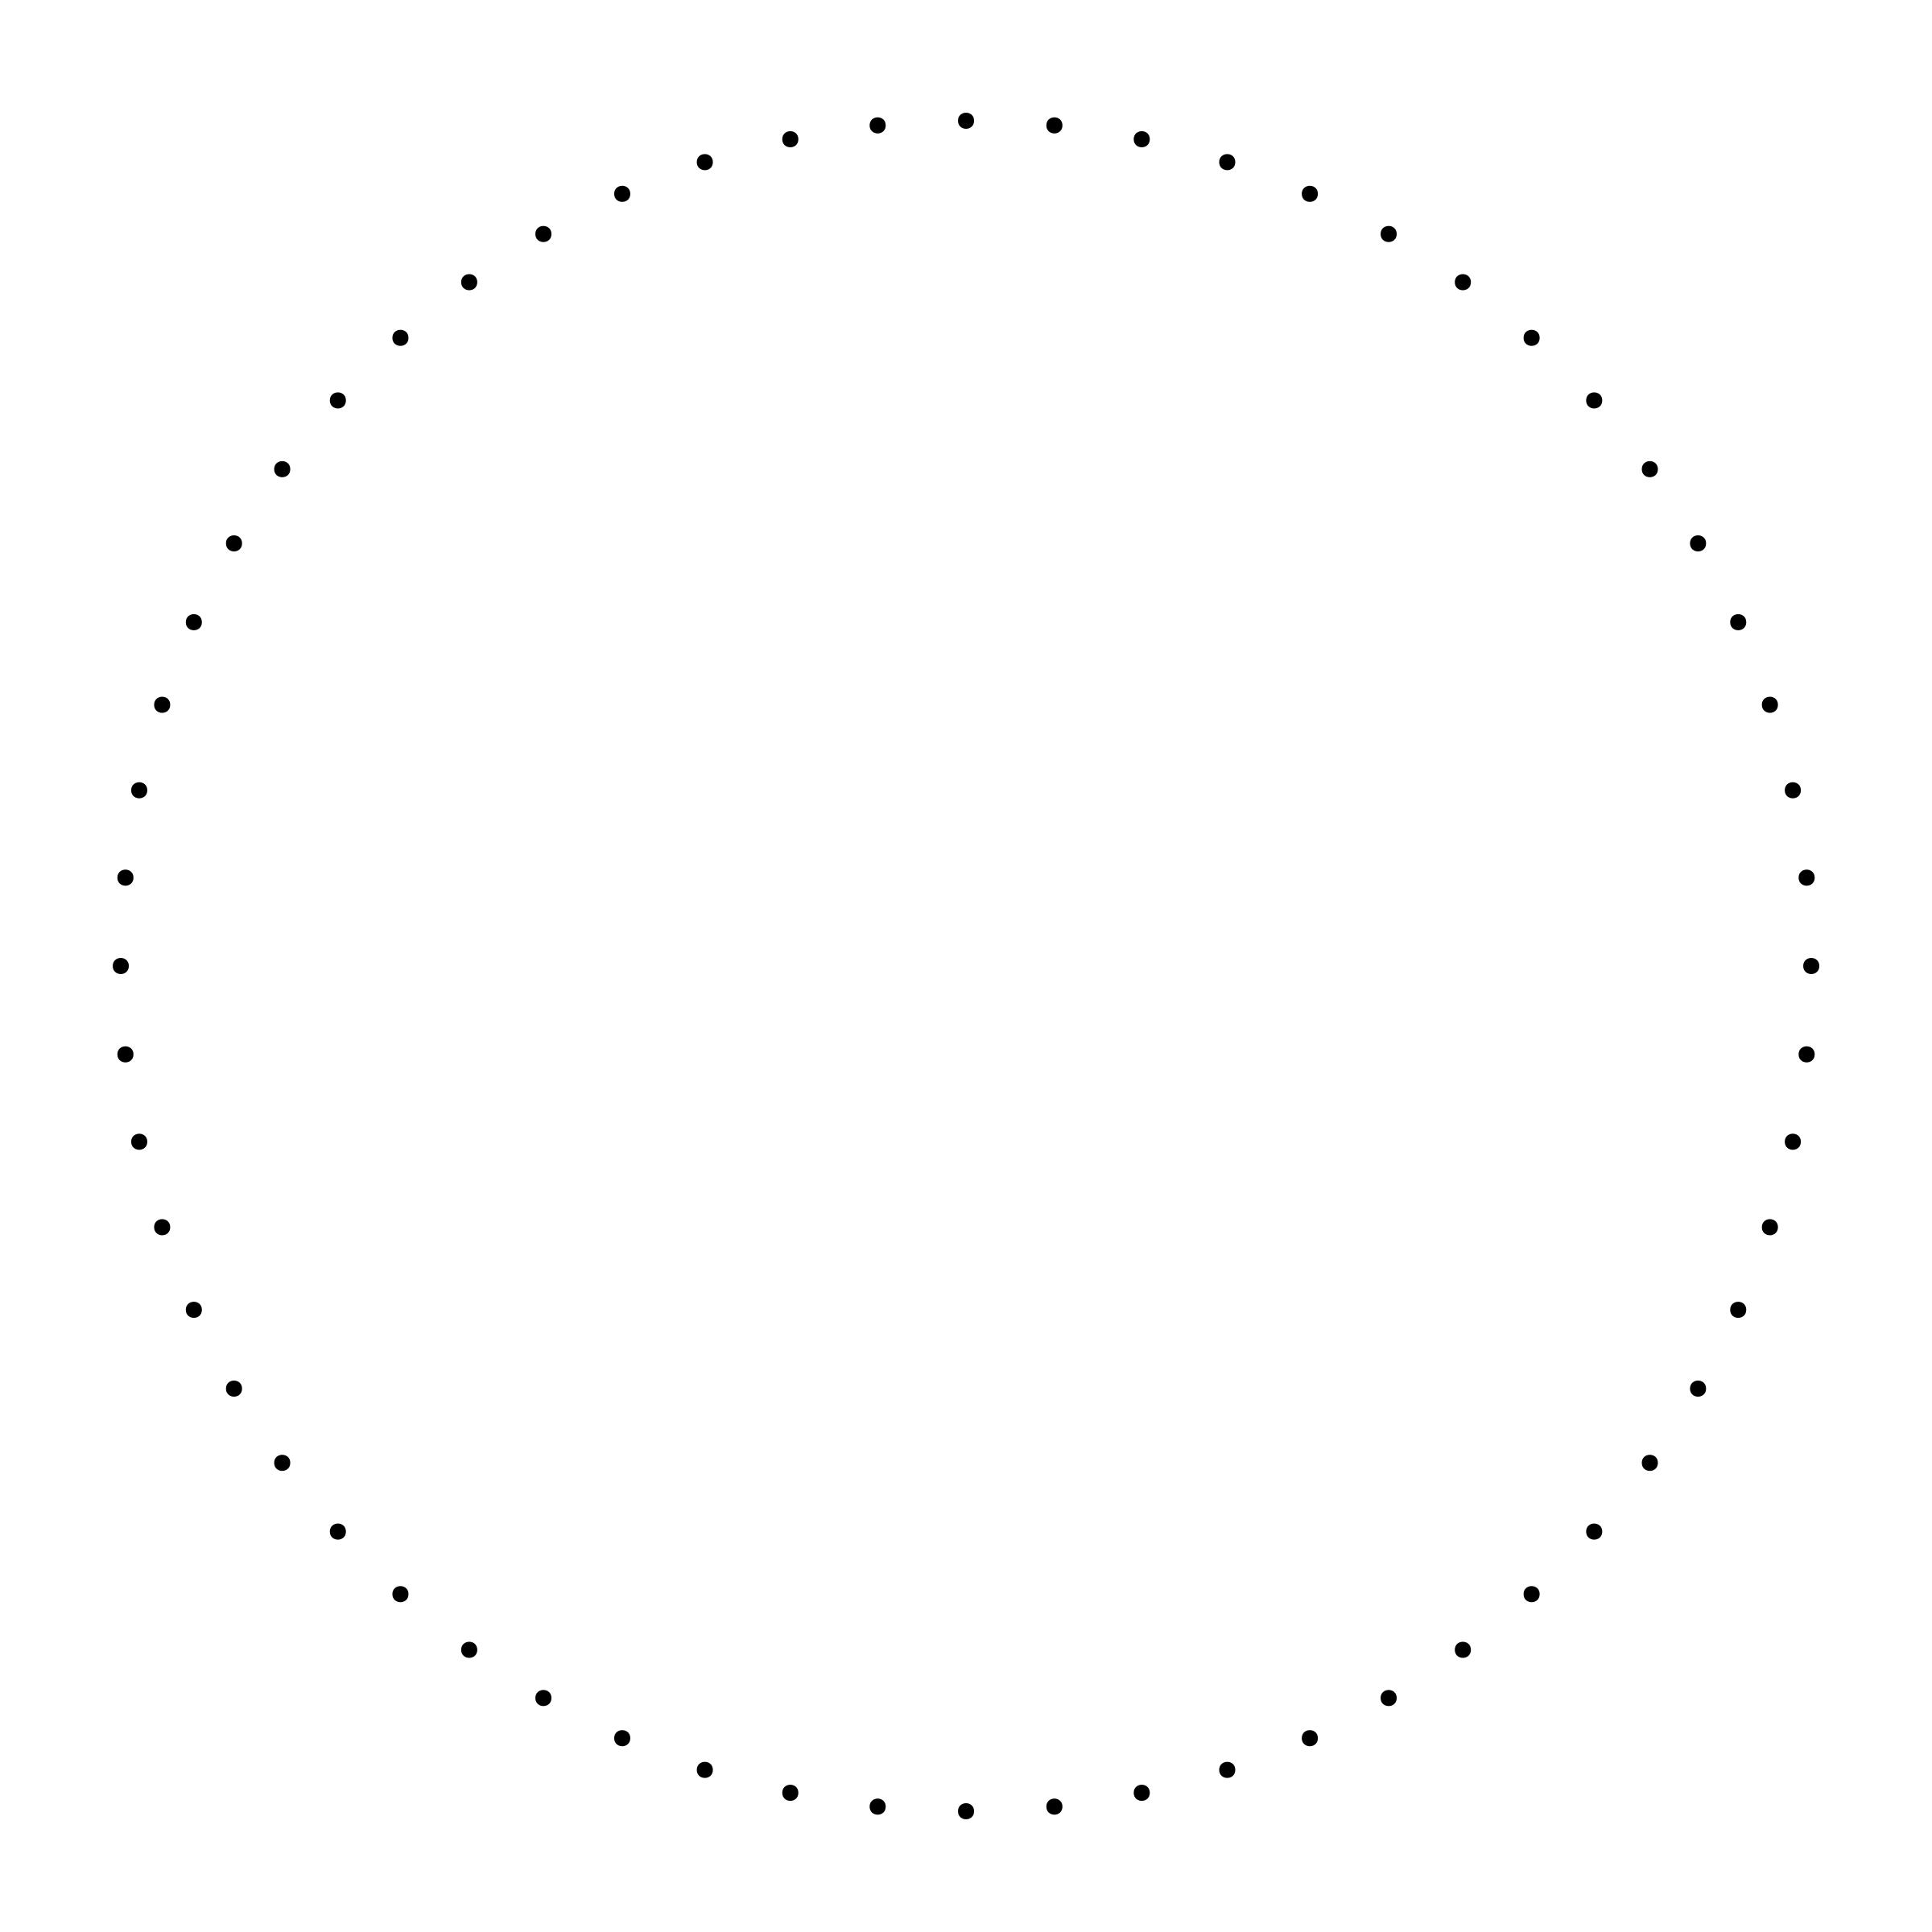 connect the 60 dots png